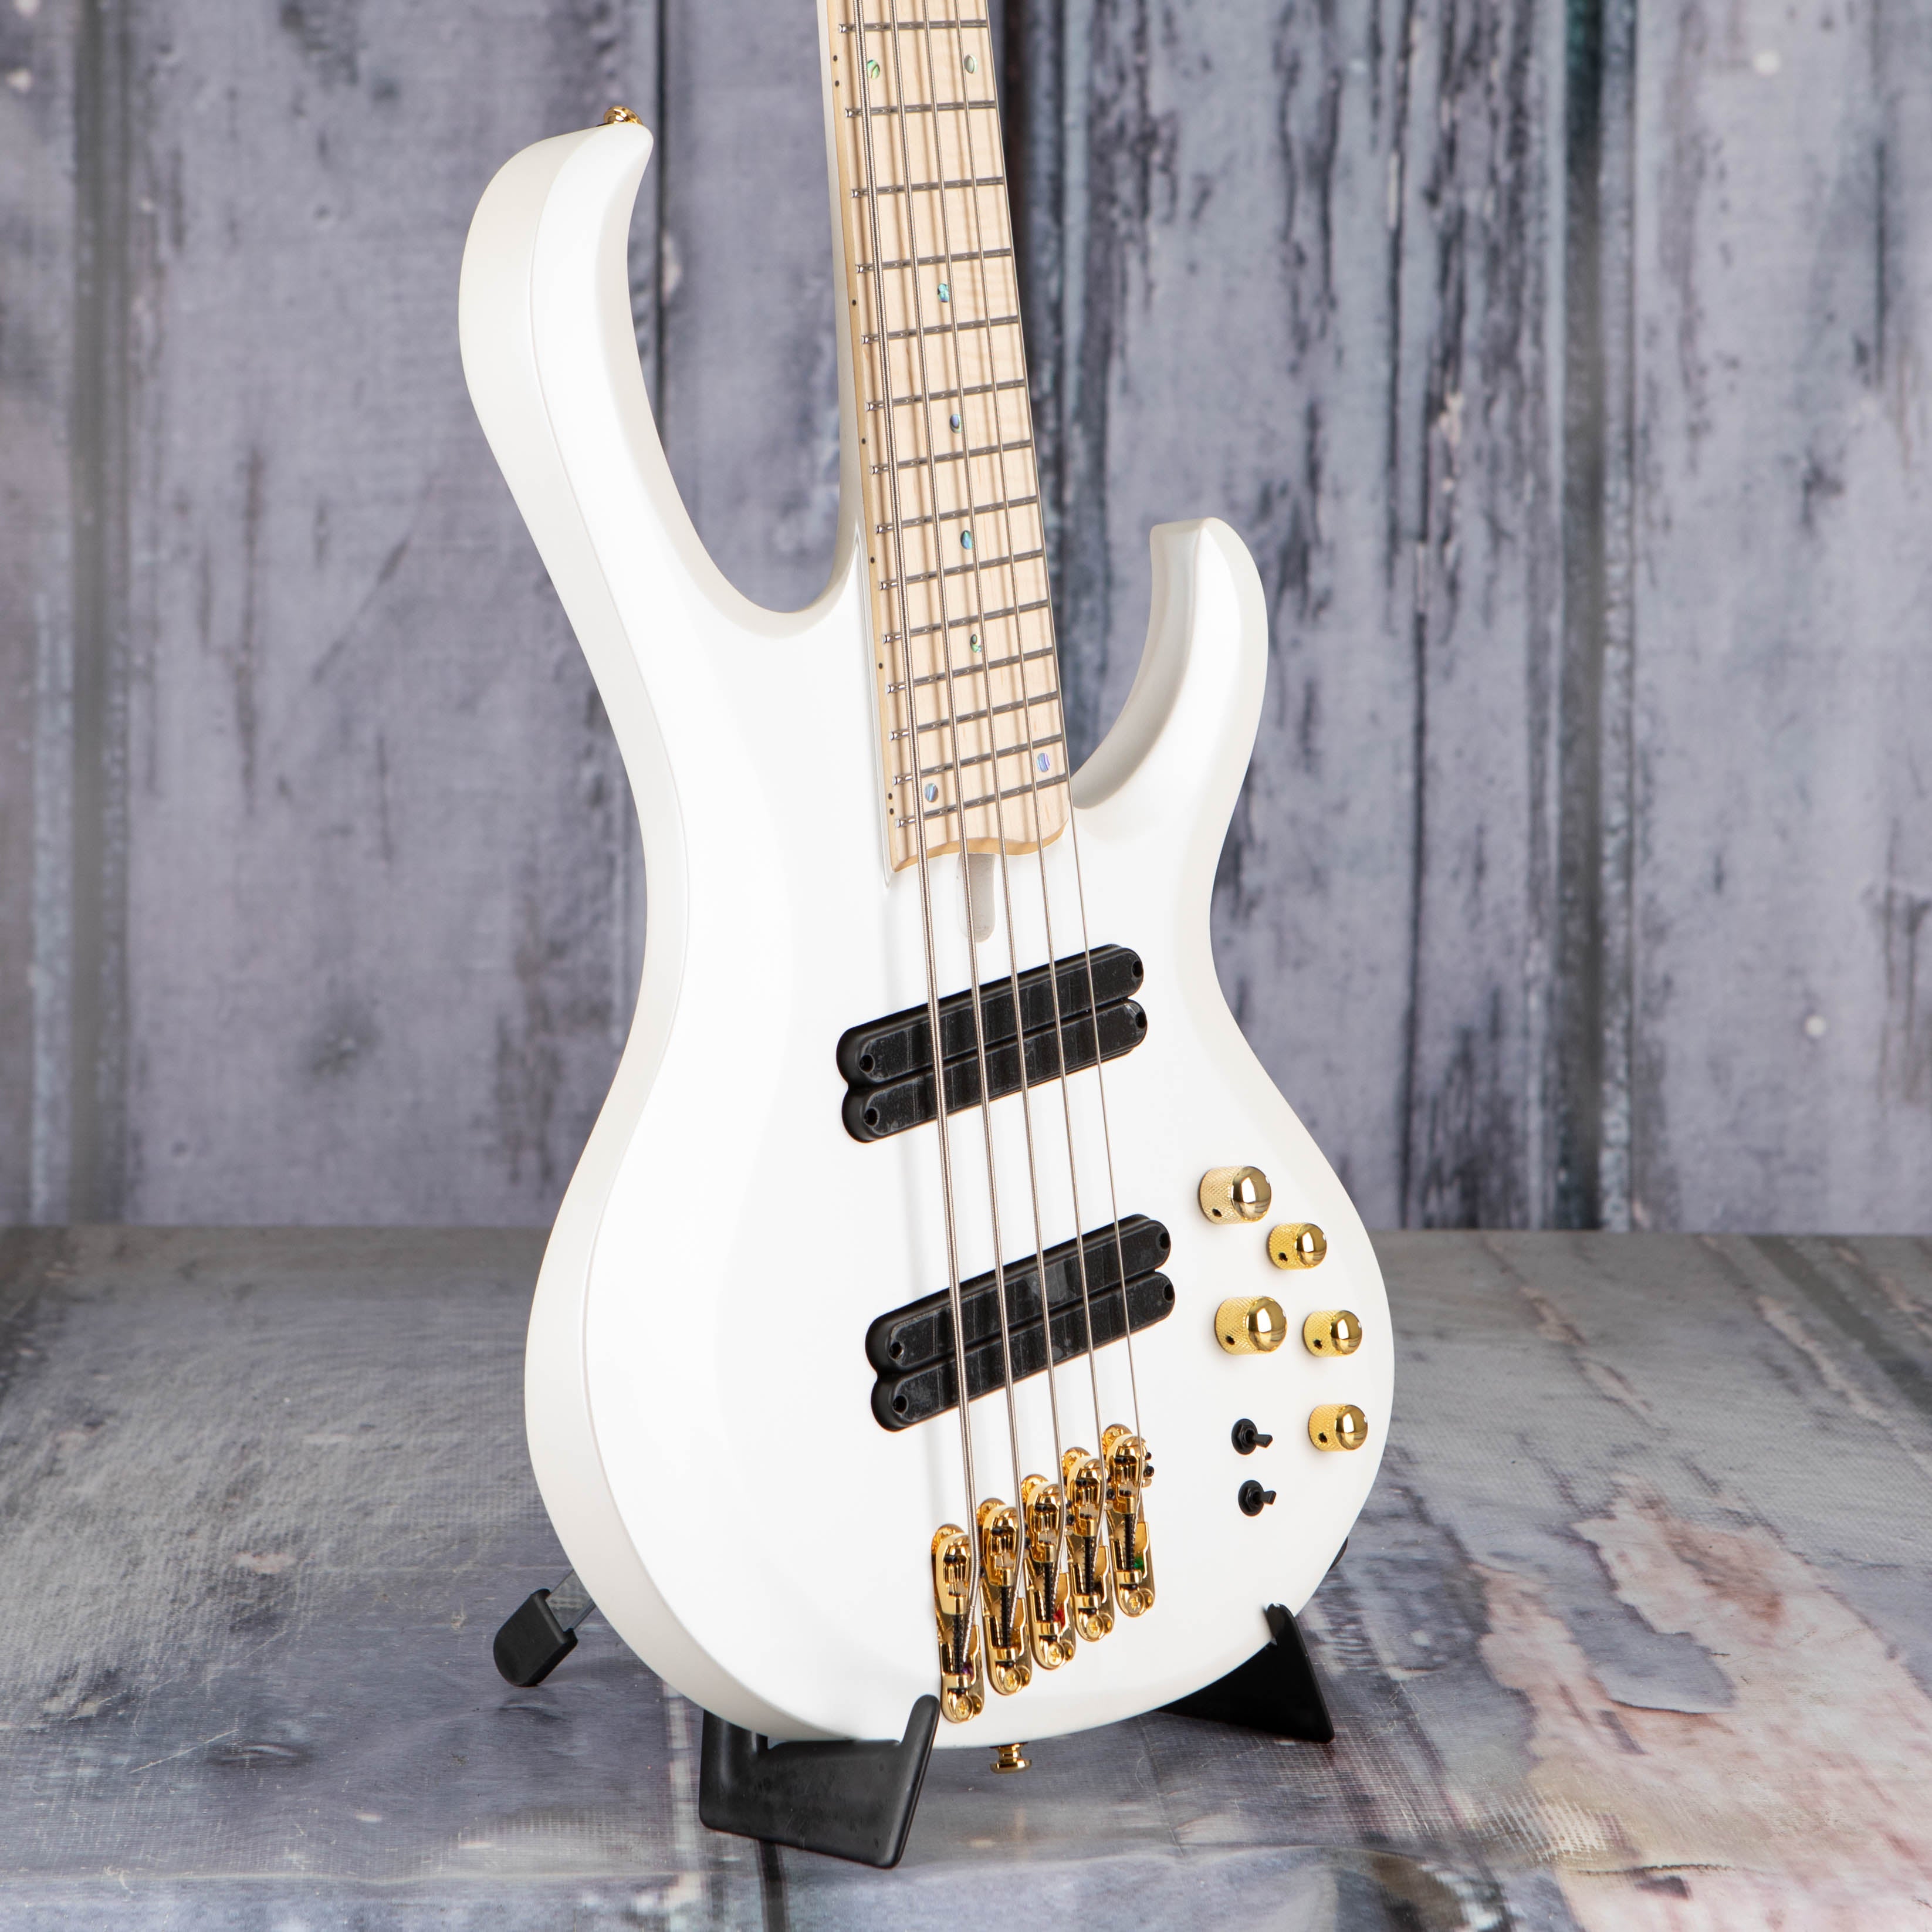 Ibanez BTB605MLM Bass Workshop Multi-Scale 5-String Electric Bass Guitar, Pearl White Matte, angle